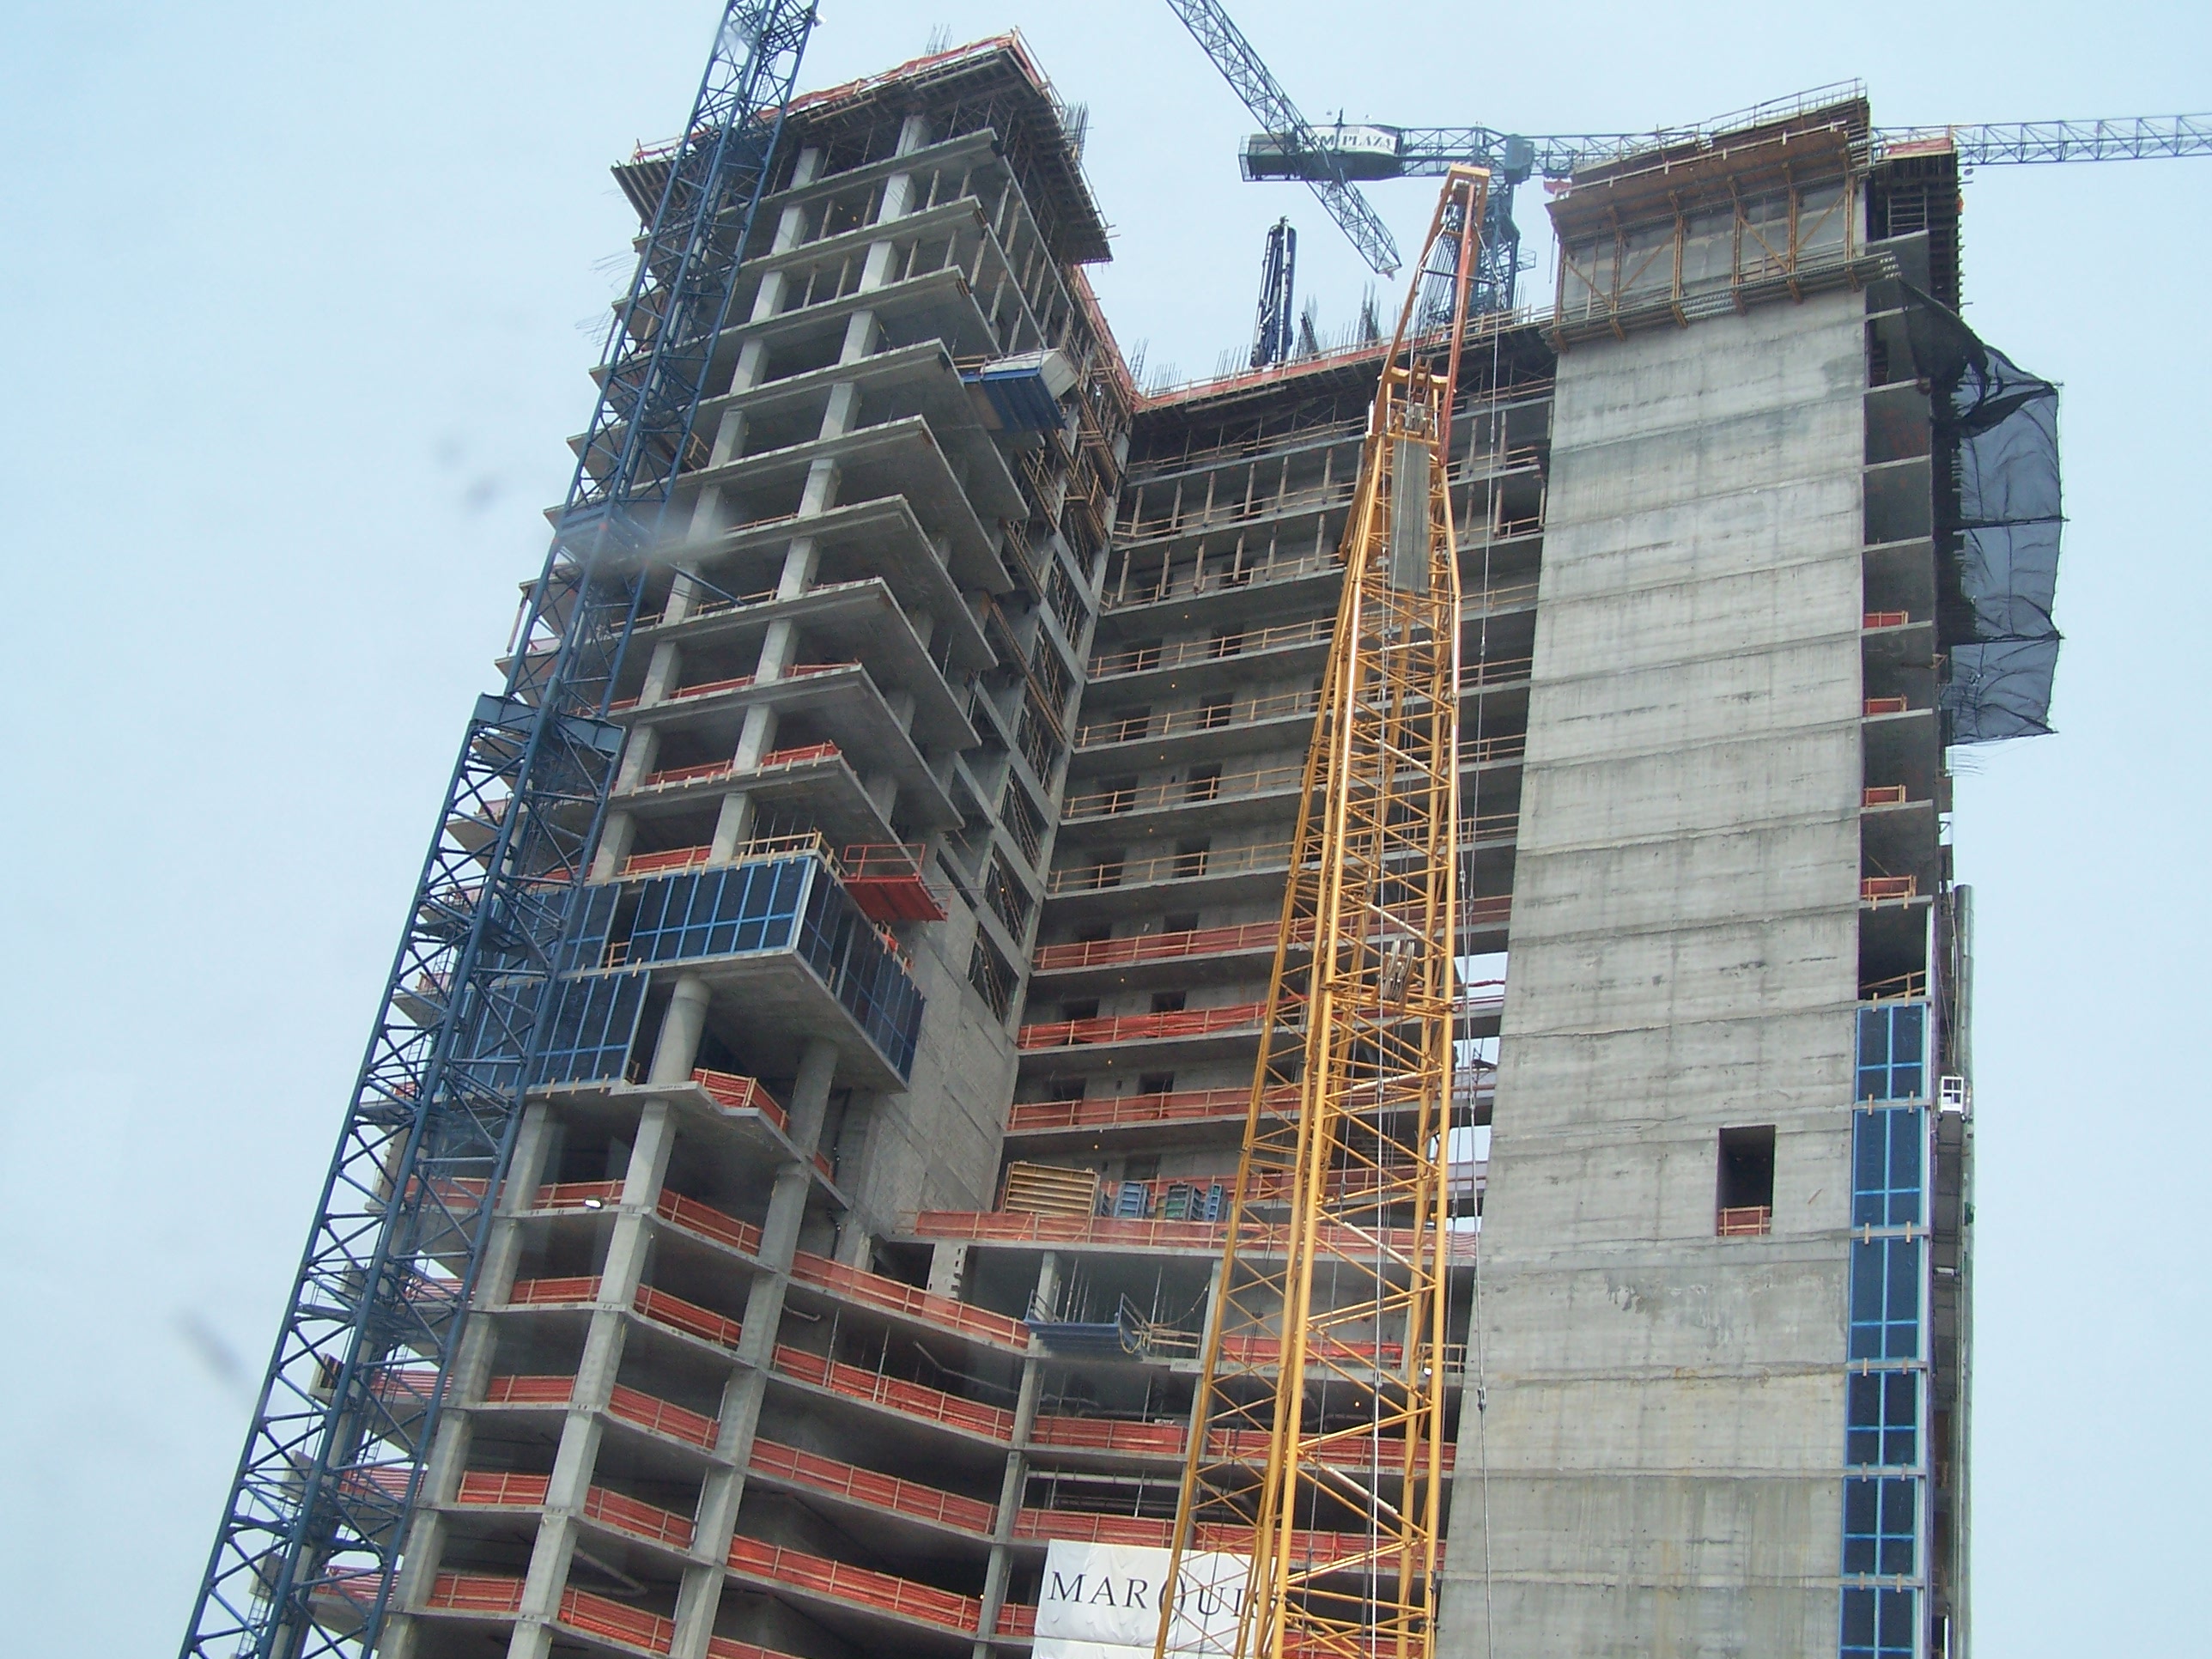 File:COnstruction work in downtown Miami.jpg - Wikimedia Commons